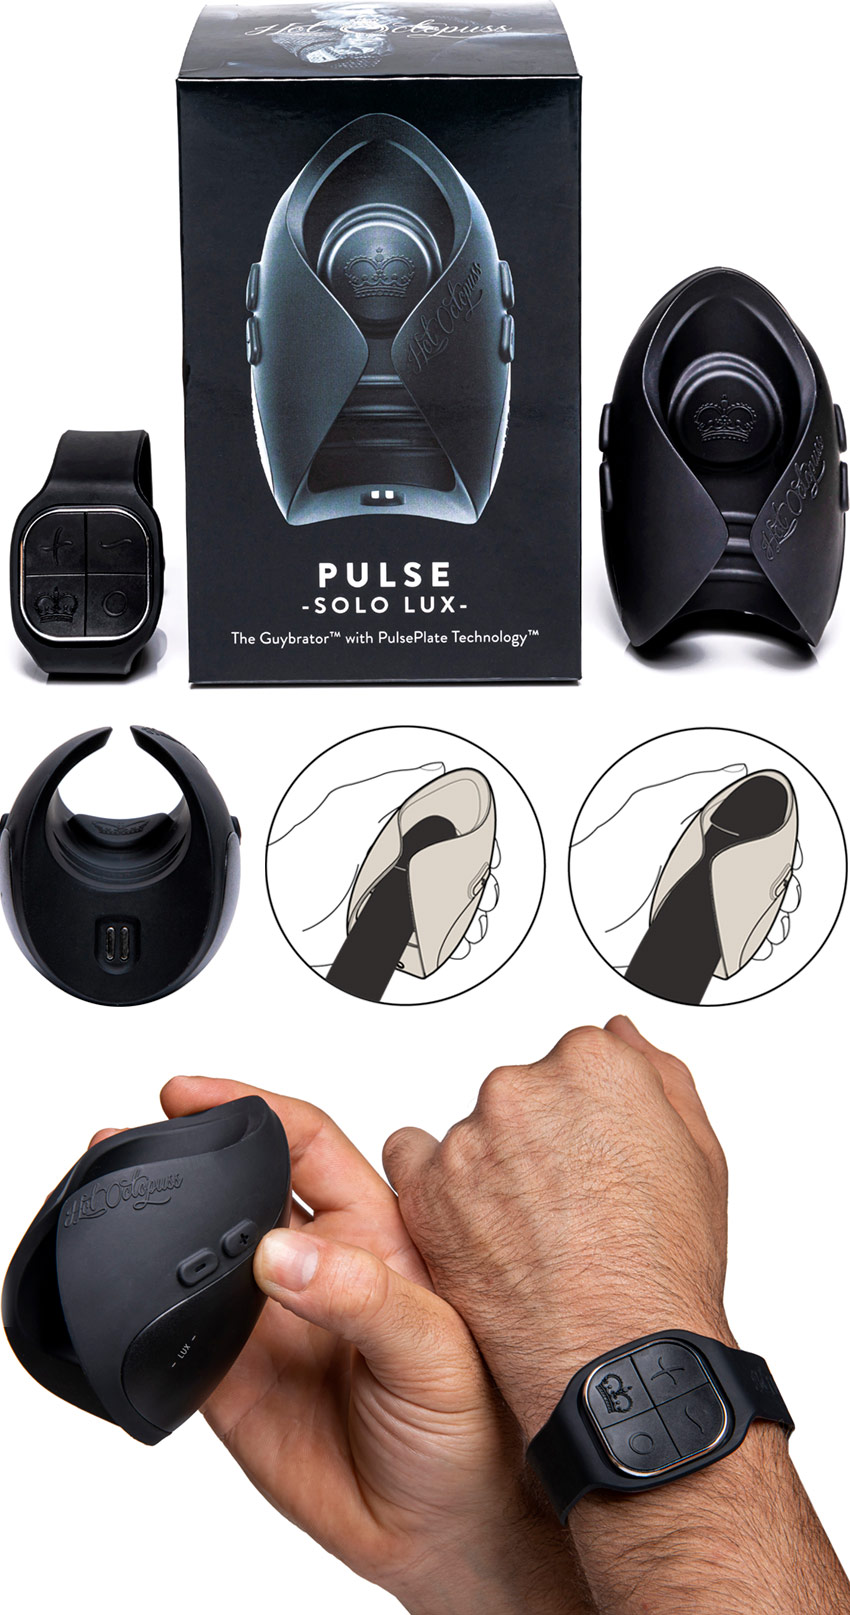 Hot Octopuss PULSE Solo Lux (with remote control wristband)